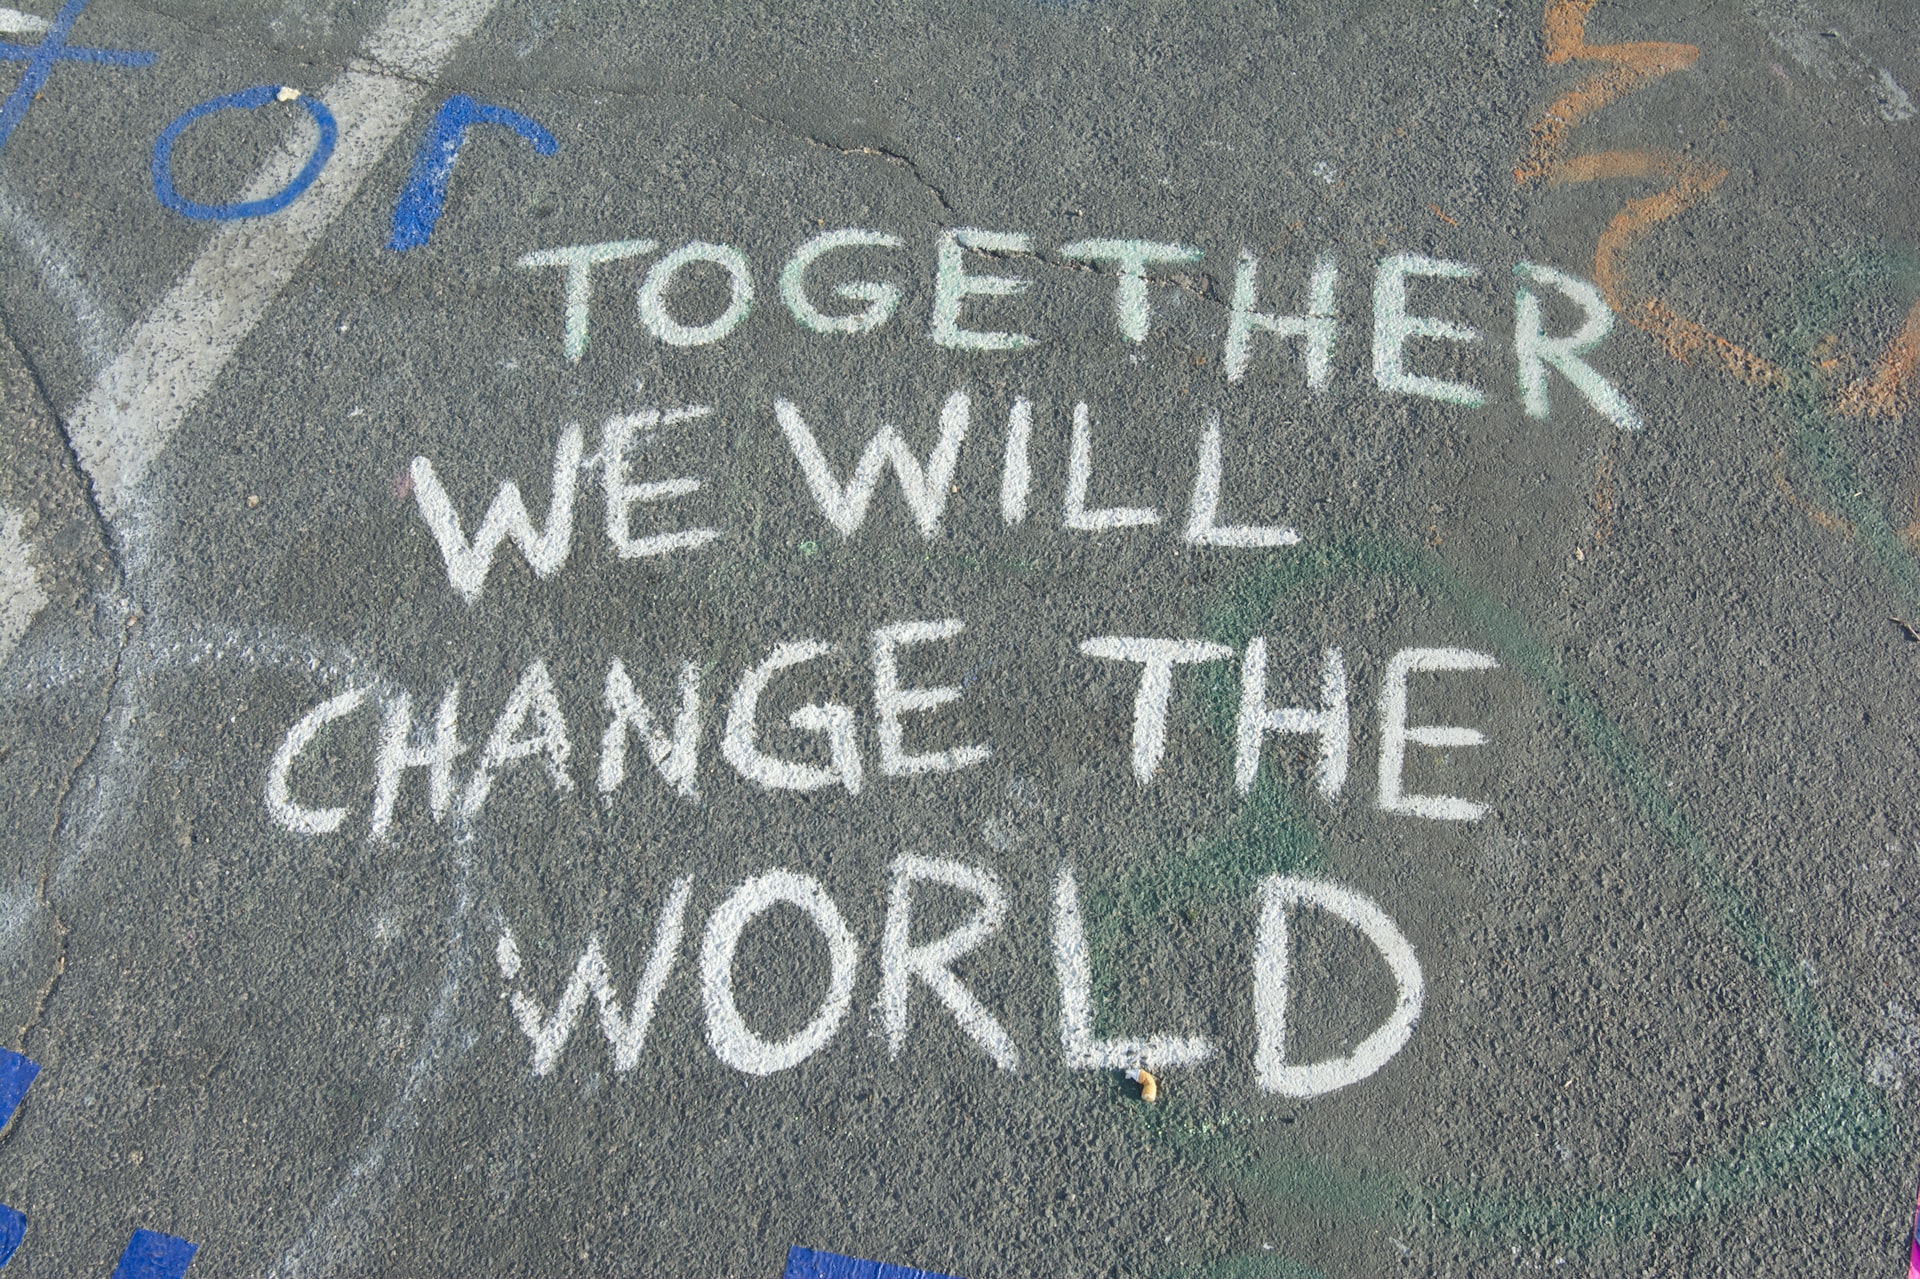 "Together we change the world" written with chalk on a road